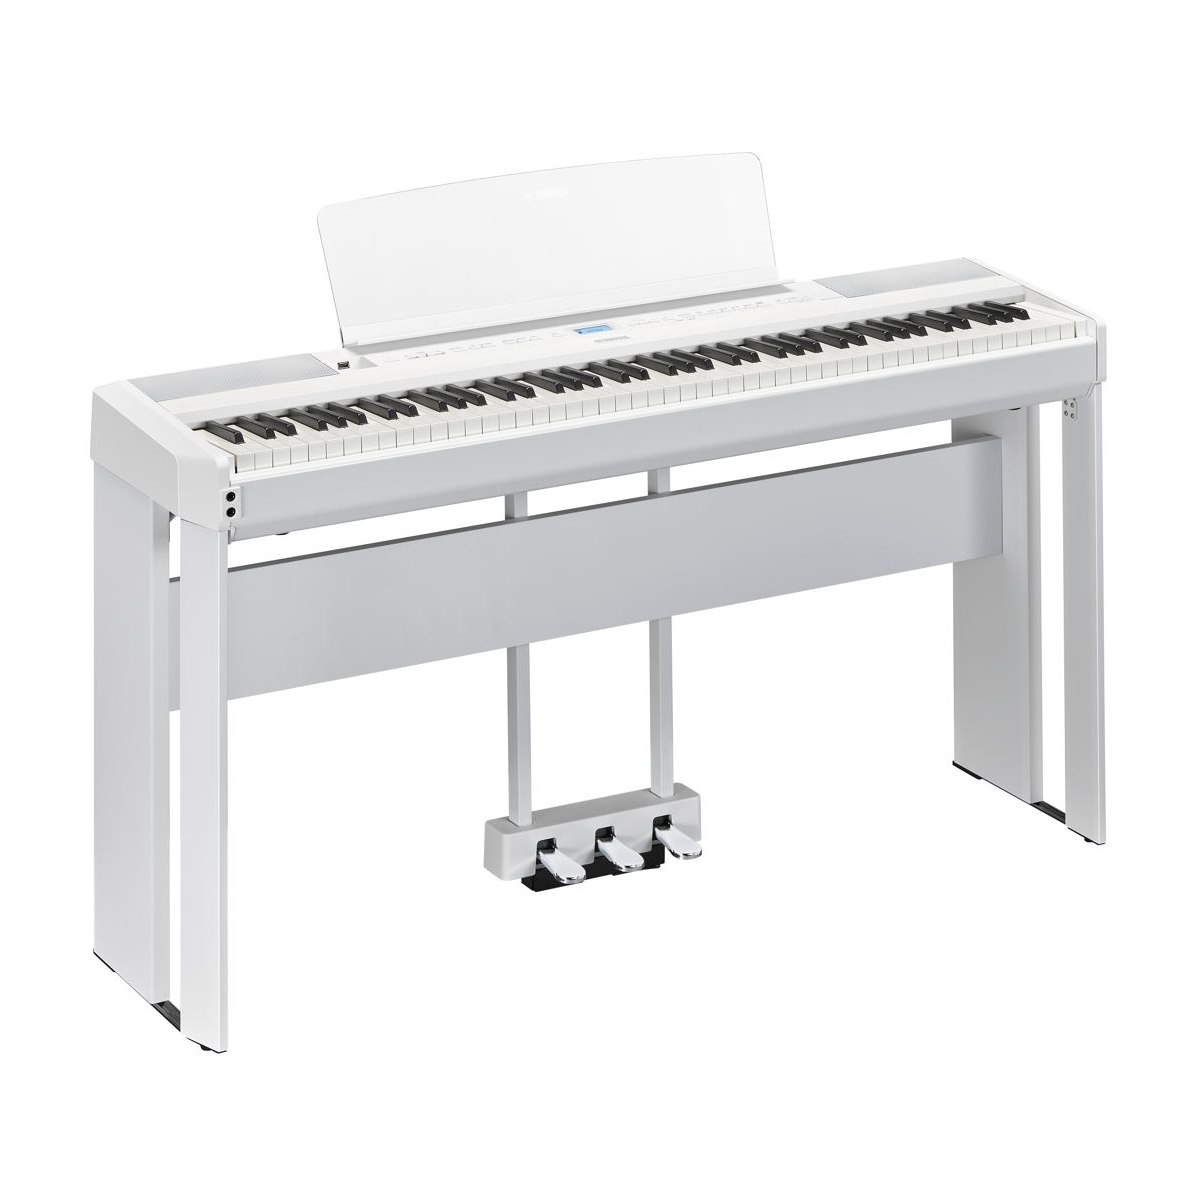 Packs Claviers et Synthé - Yamaha - Pack P-525 (BLANC) + Stand...